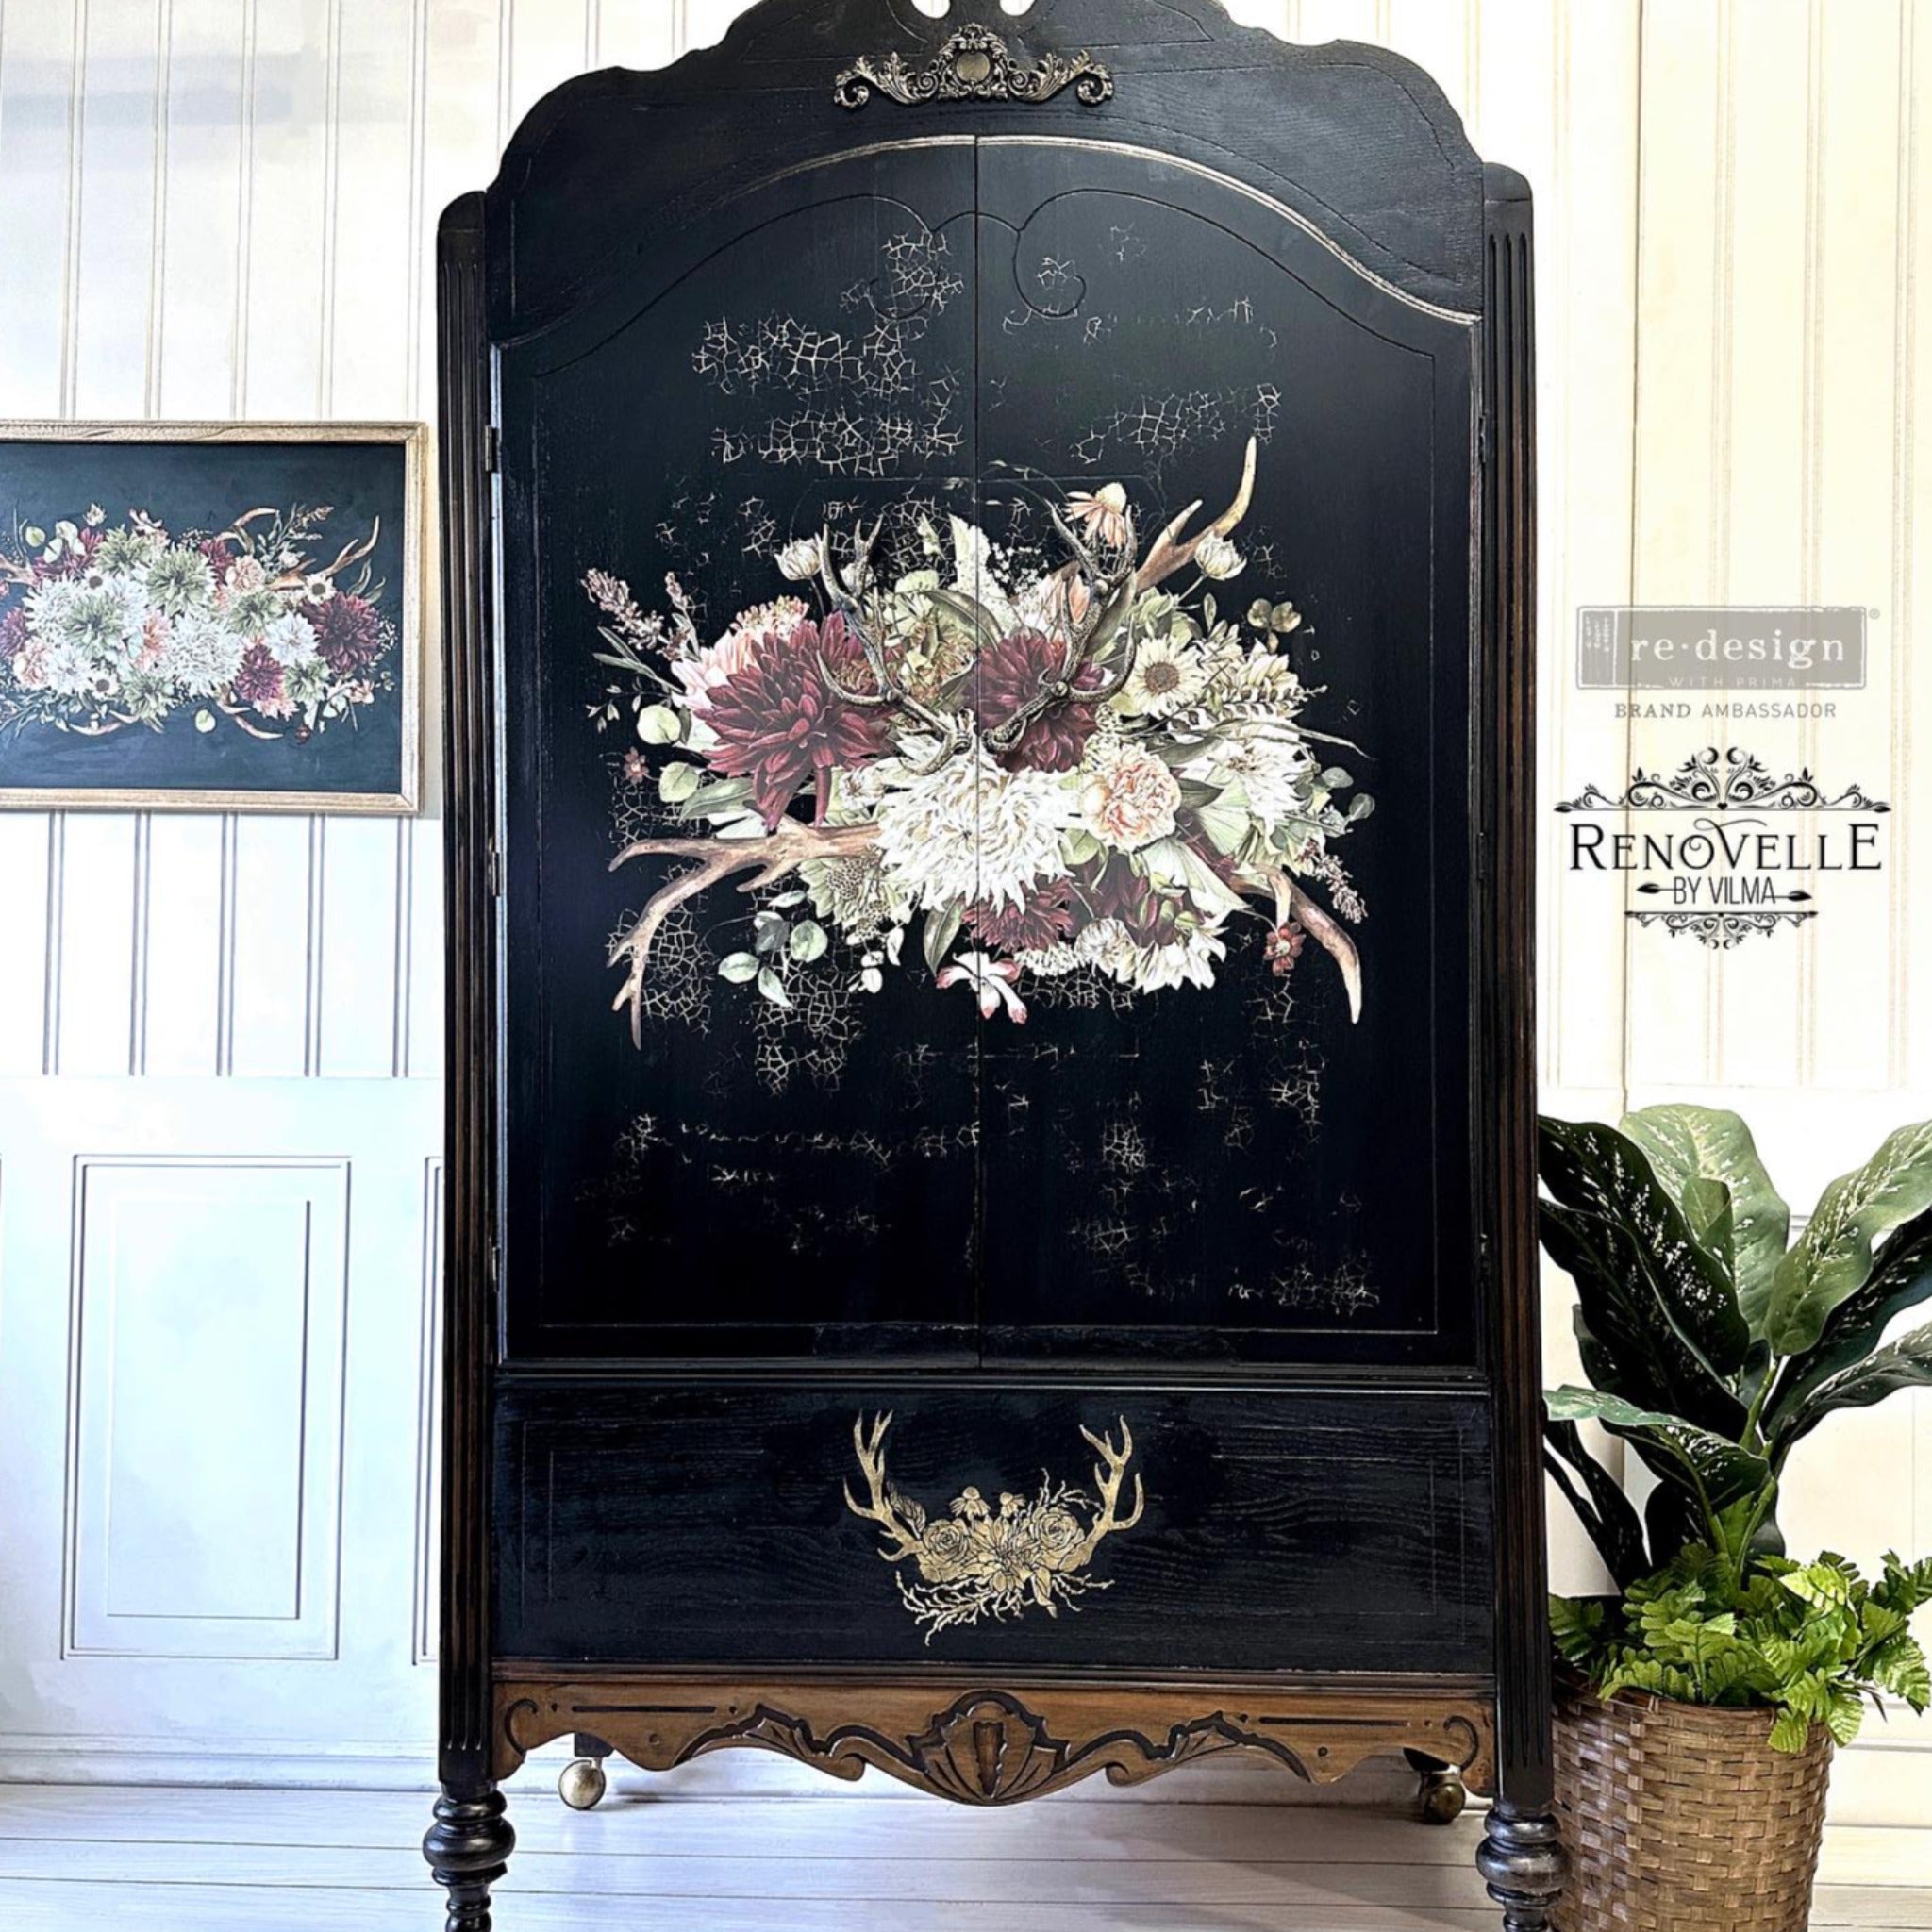 A large armoire refurbished by Renovelle by Vilma is painted black and features ReDesign with Prima's Loggers Lodge silicone moulds on its bottom front panel. ReDesign with Prima's Rustic Charm furniture transfer is also featured on the doors of the armoire.